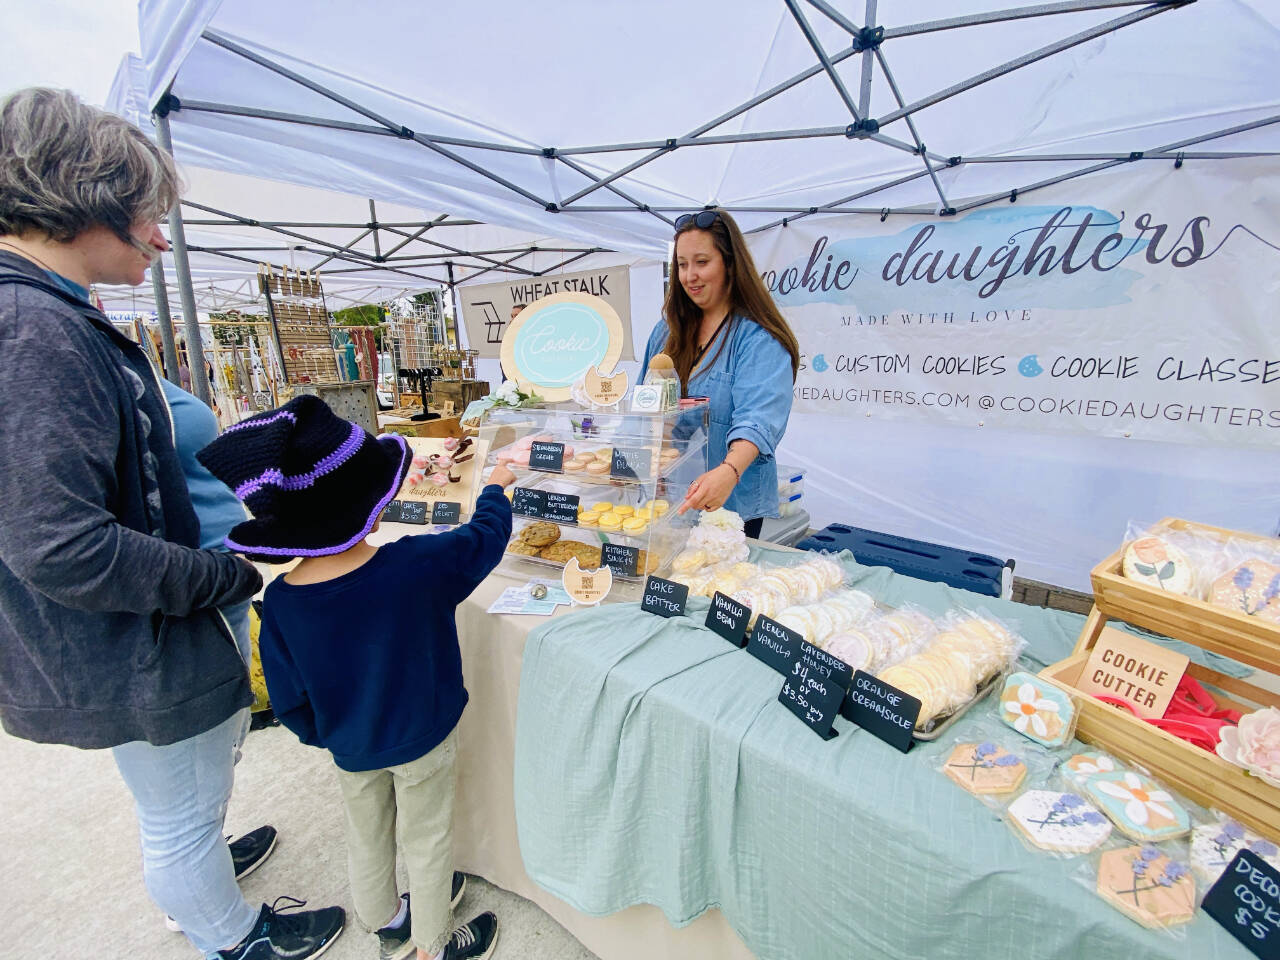 Photo by Emma Jane Garcia/Sequim Farmers & Artisans Market / Sarah Harrington greets customers at the Cookie Daughters booth at the Sequim Farmers & Artisans Market.